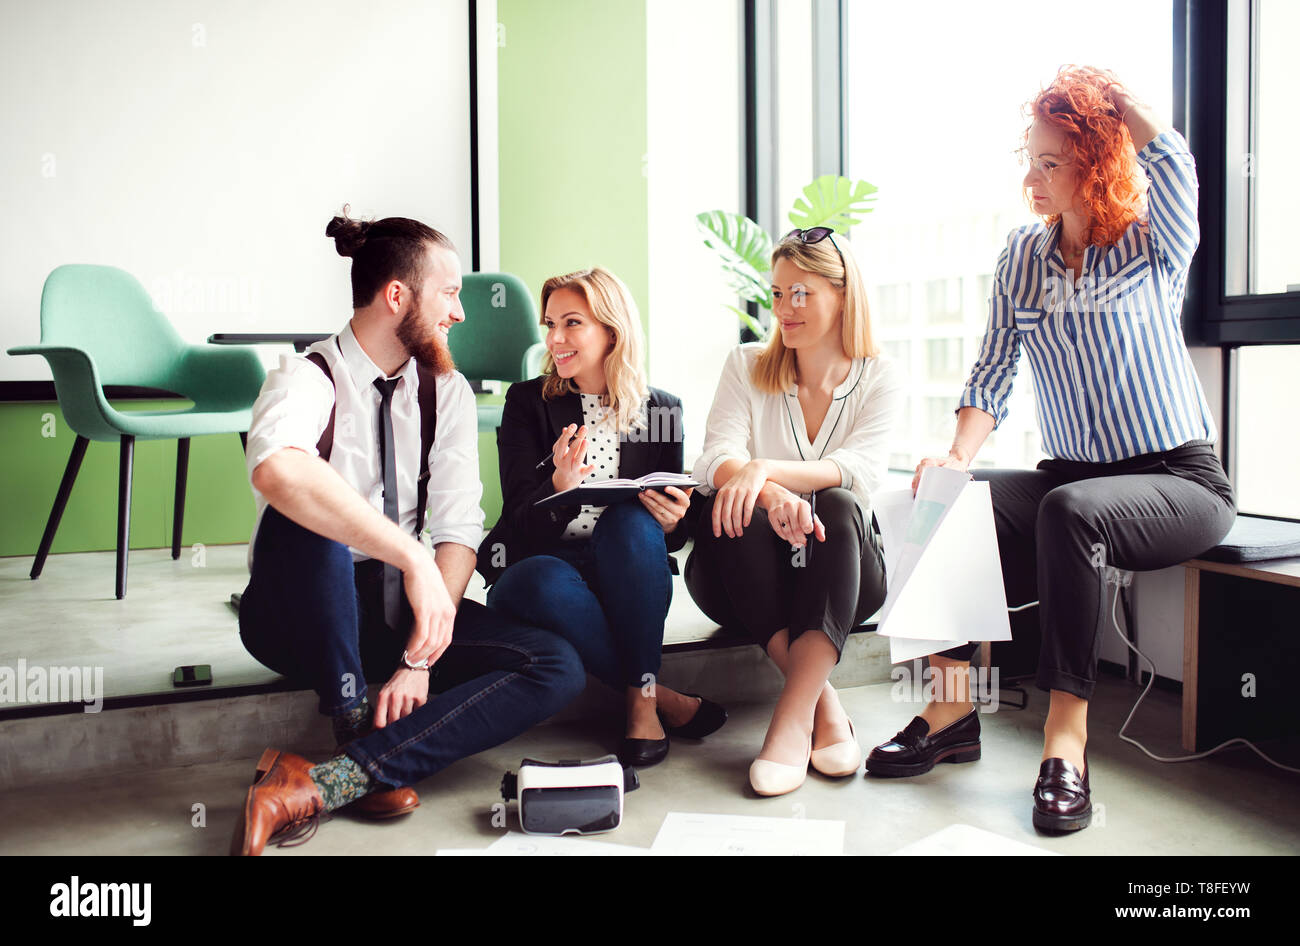 A group of young business people sitting on the floor in an office, talking. Stock Photo